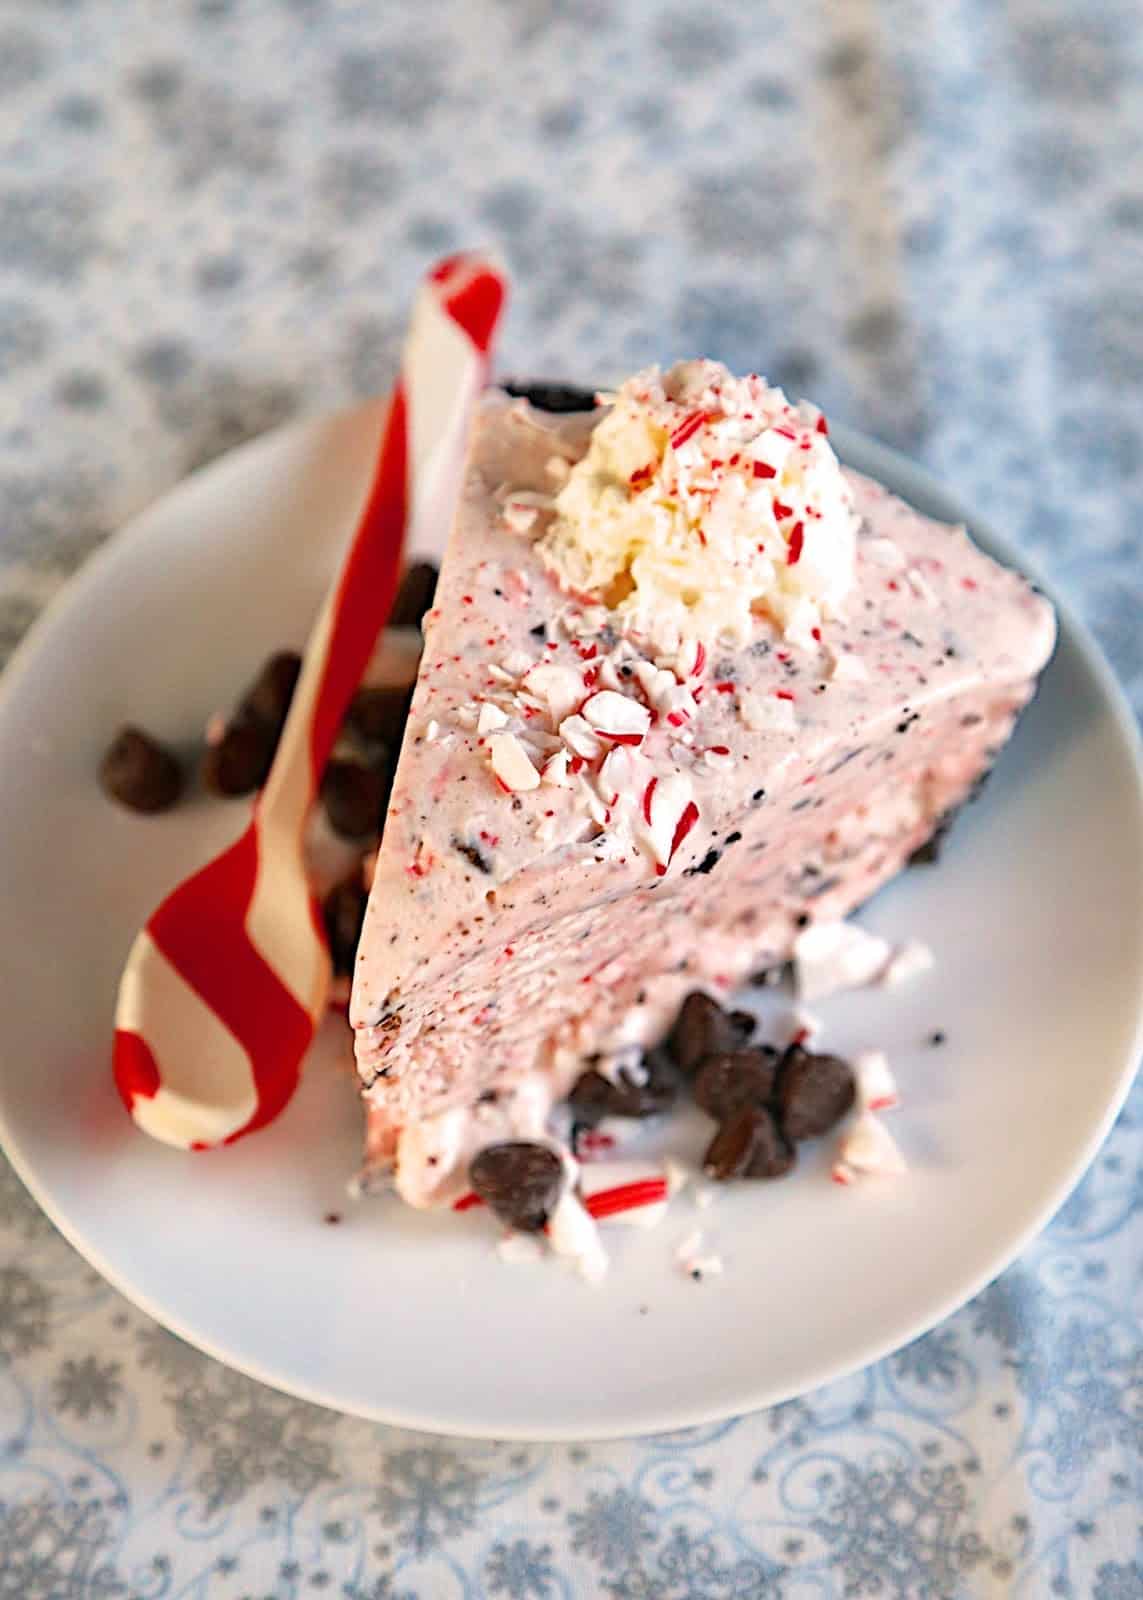 Peppermint Chocolate Chip Ice Cream Pie {No Machine Required} - tastes like the milkshake from Chick-fil-a! SO easy! chocolate cookie crust, sweetened condensed milk. whipped cream, chocolate chips and candy canes. Everyone LOVES this treat!